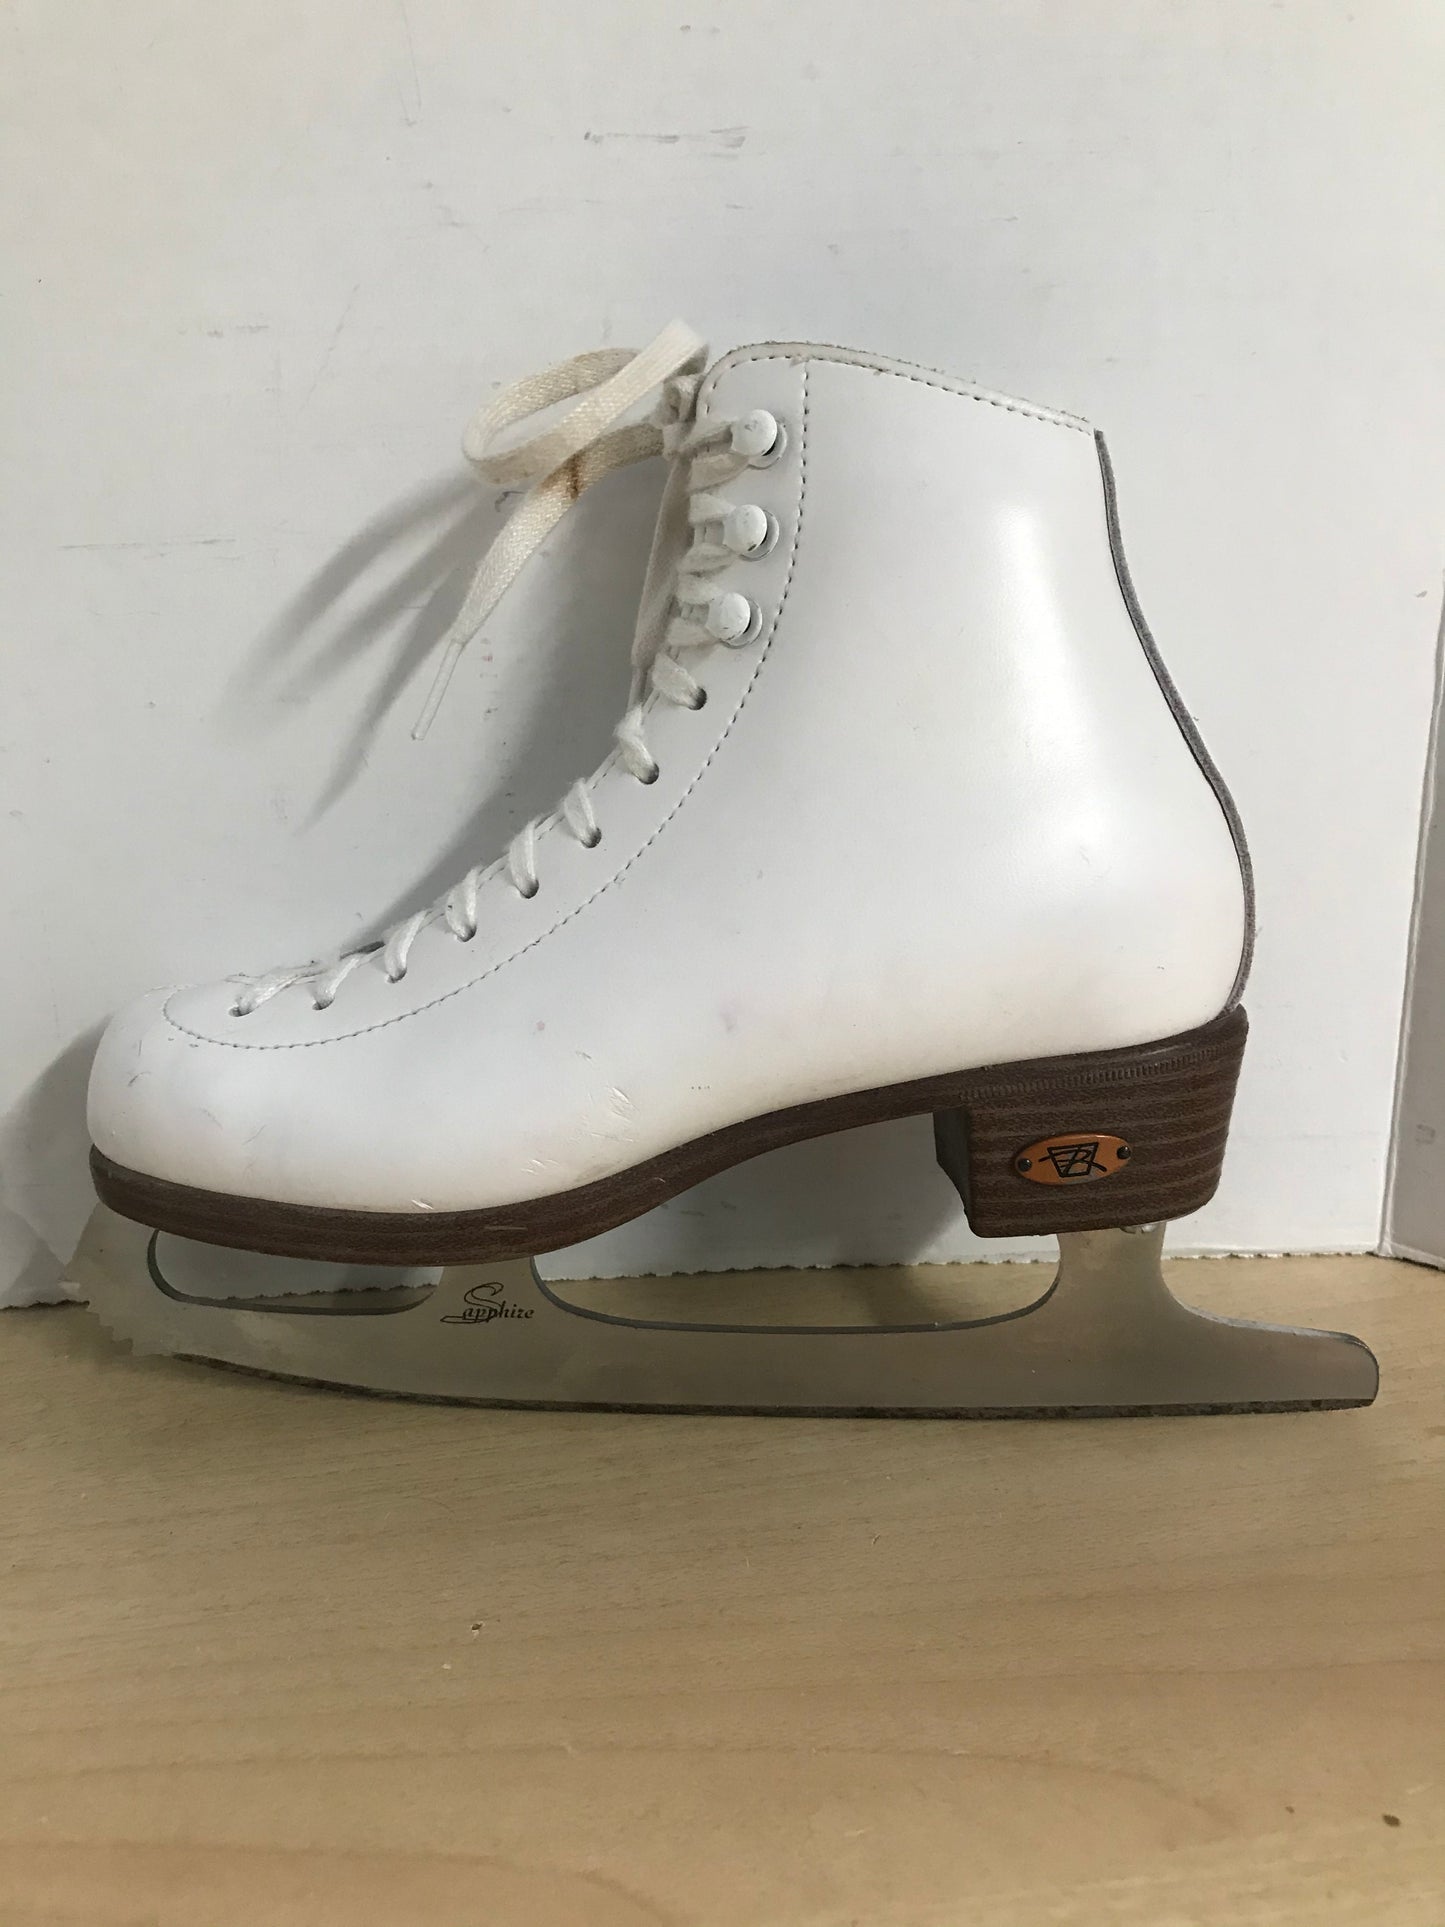 Figure Skates Child Size 1 Riedell Leather Excellent